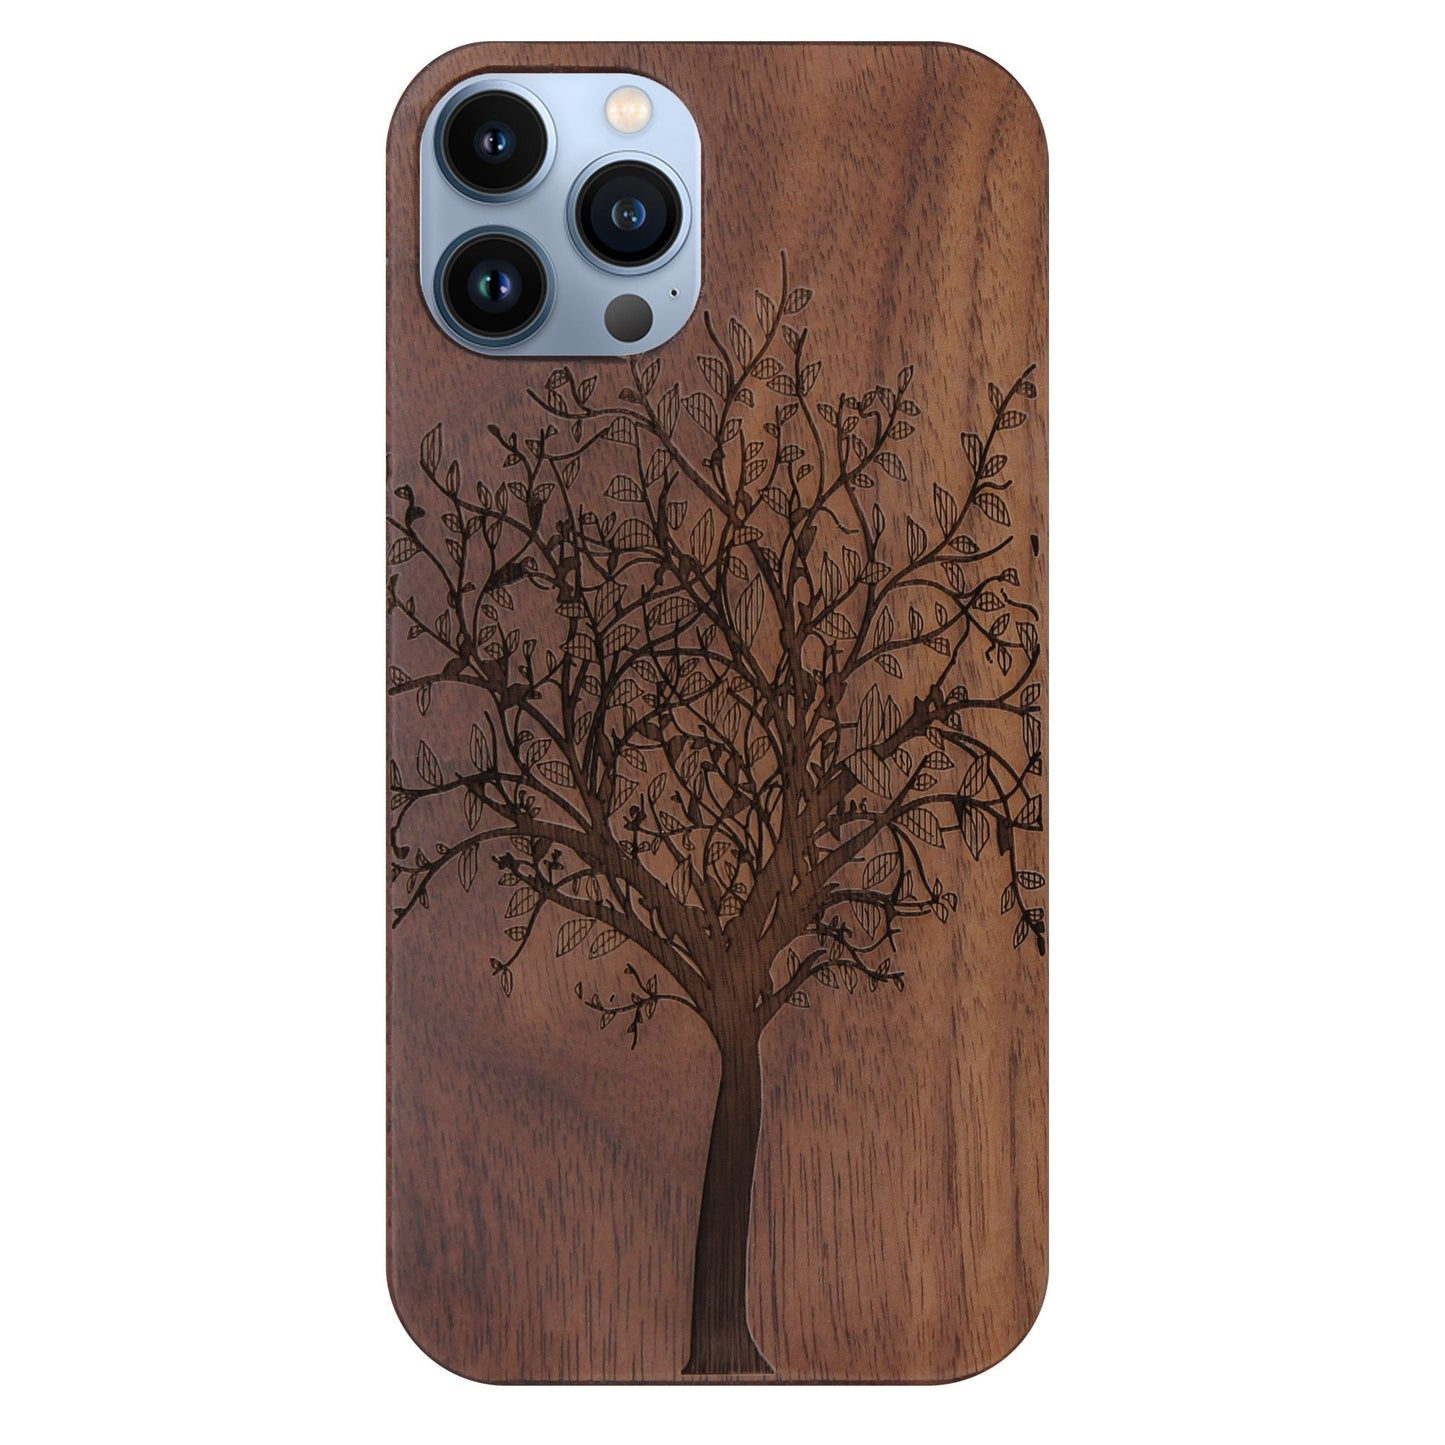 Lebensbaum Eden case made of walnut wood for iPhone 13 Pro Max